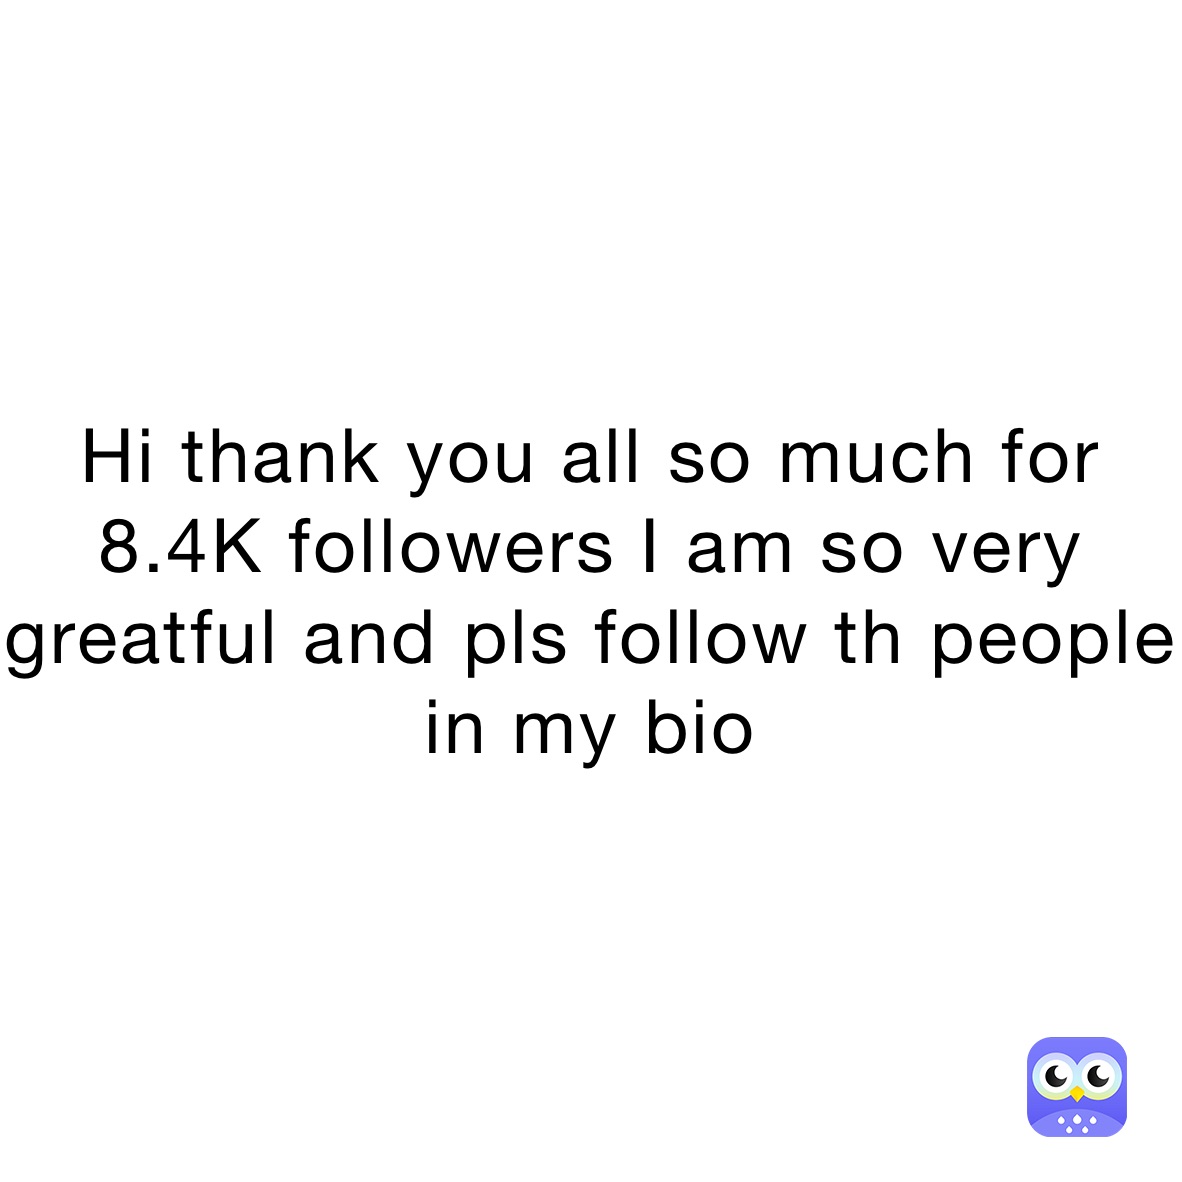 Hi thank you all so much for 8.4K followers I am so very greatful and pls follow th people
in my bio 